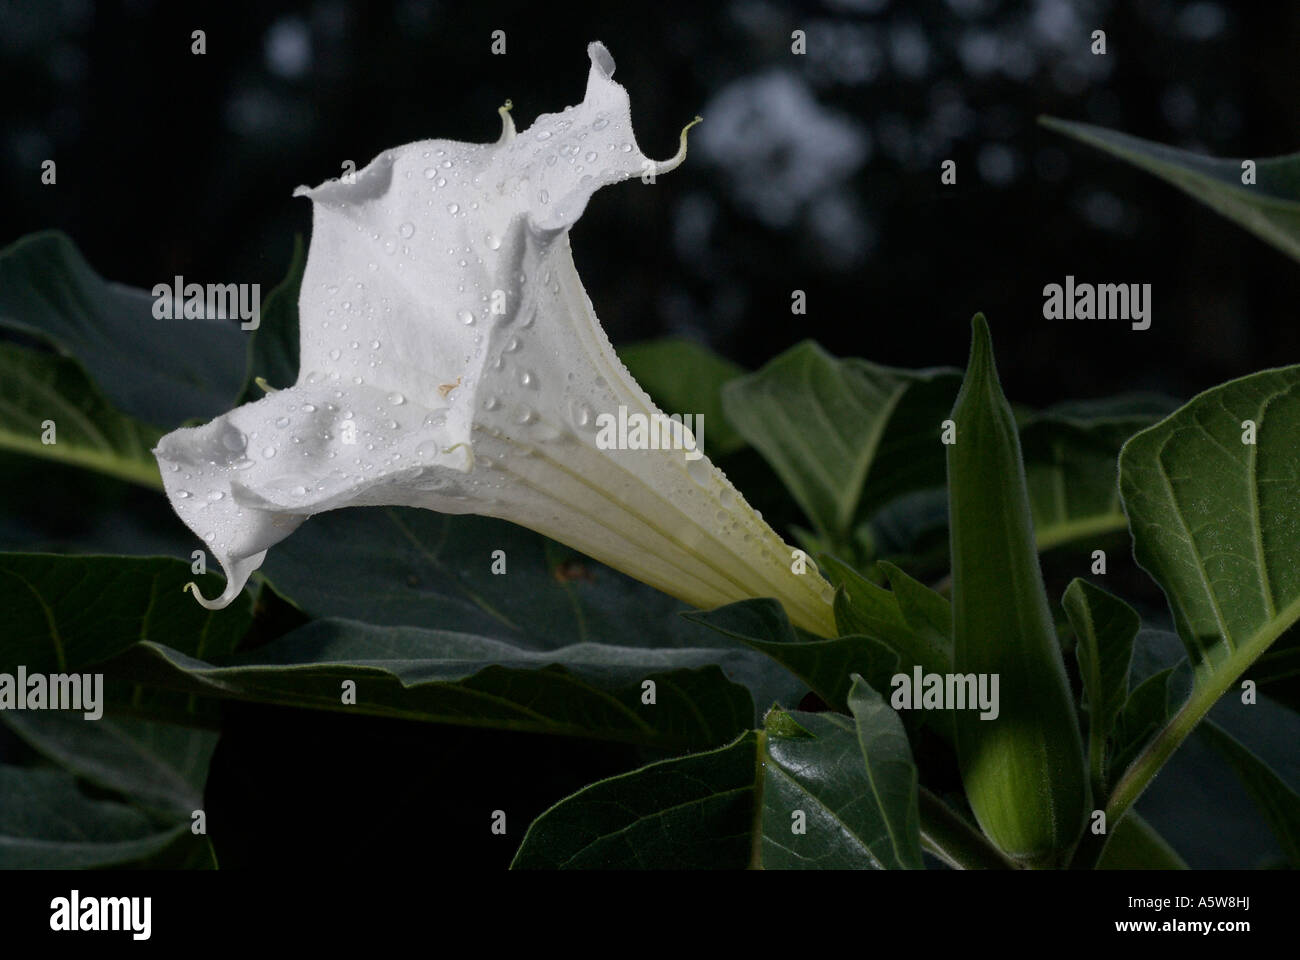 Datura stramonium or Jimson weed a poisonous plant Flower trumpet detail with raindrops Stock Photo